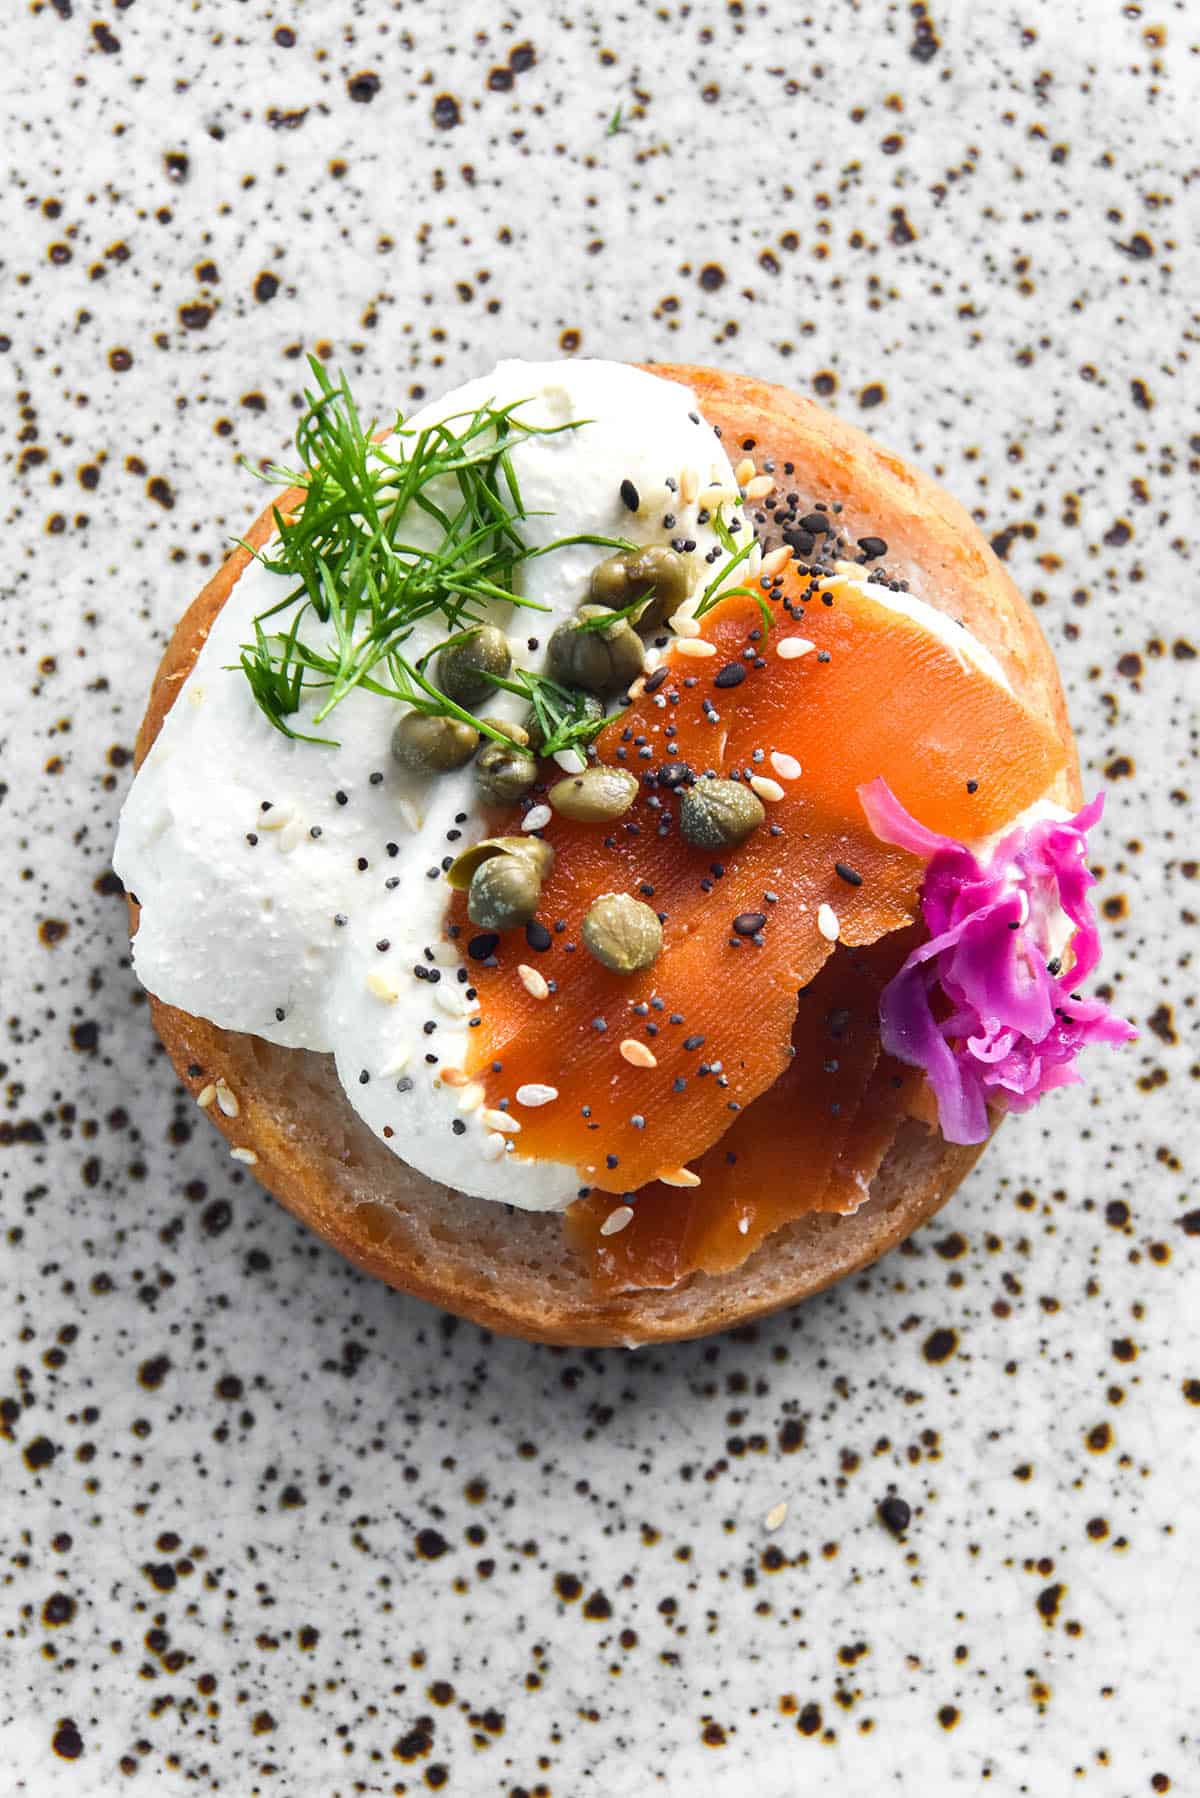 An aerial image of a gluten free bagel half topped with lactose free whipped mascarpone, carrot lox, capers, dill, FODMAP friendly everything bagel seasoning and some FODMAP friendly 'pickled red onion.' The bagel half sits in the centre of a white speckled ceramic plate.